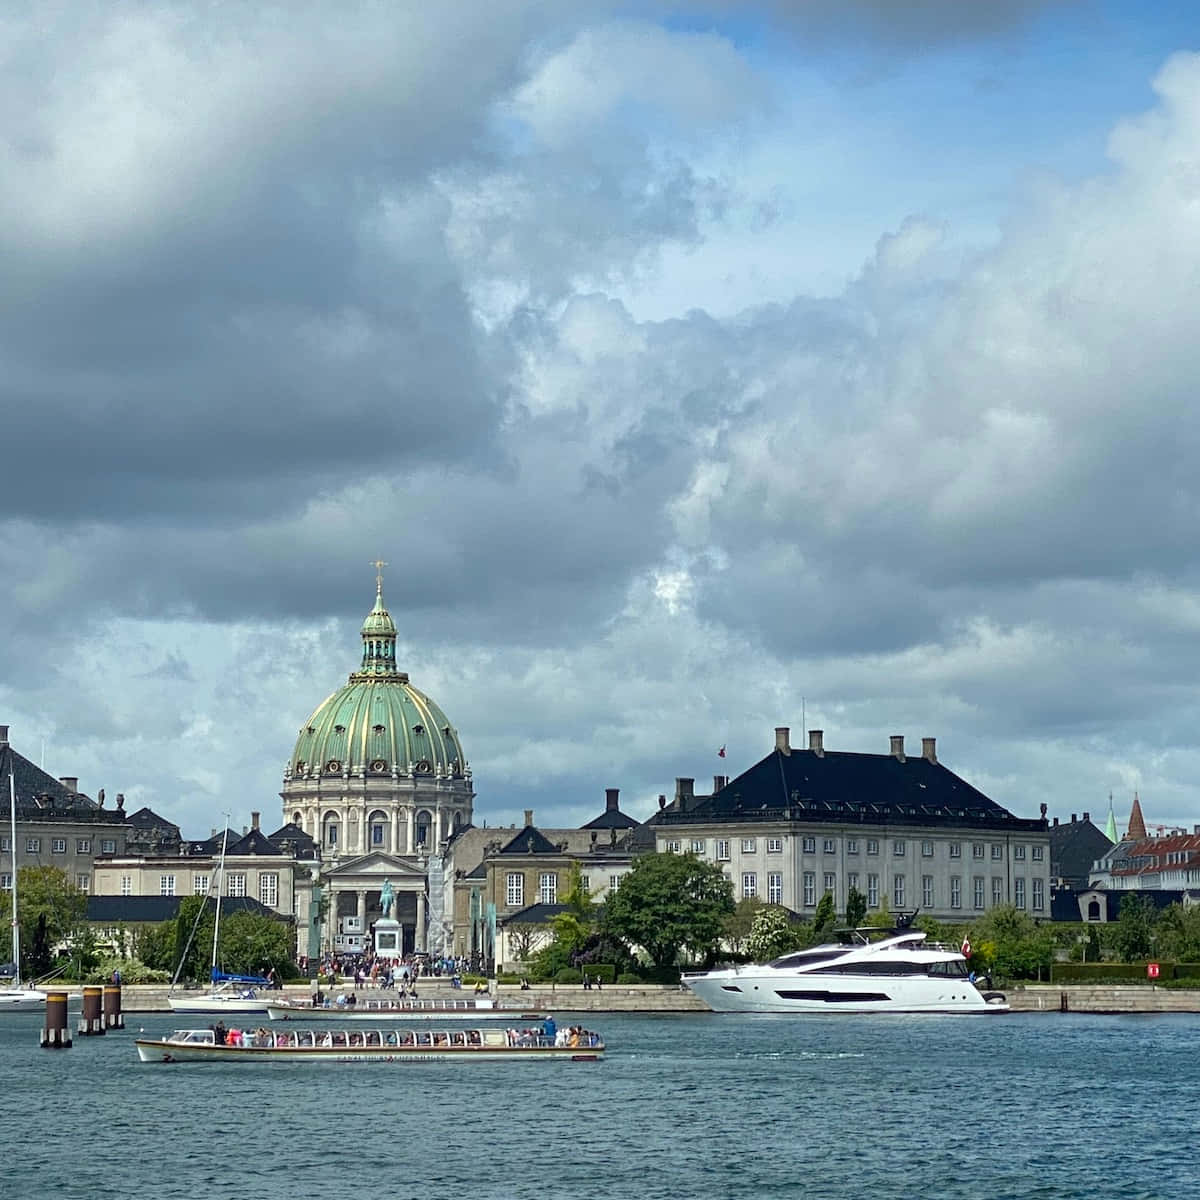 Download Amalienborg Palace From A Distance Wallpaper | Wallpapers.com